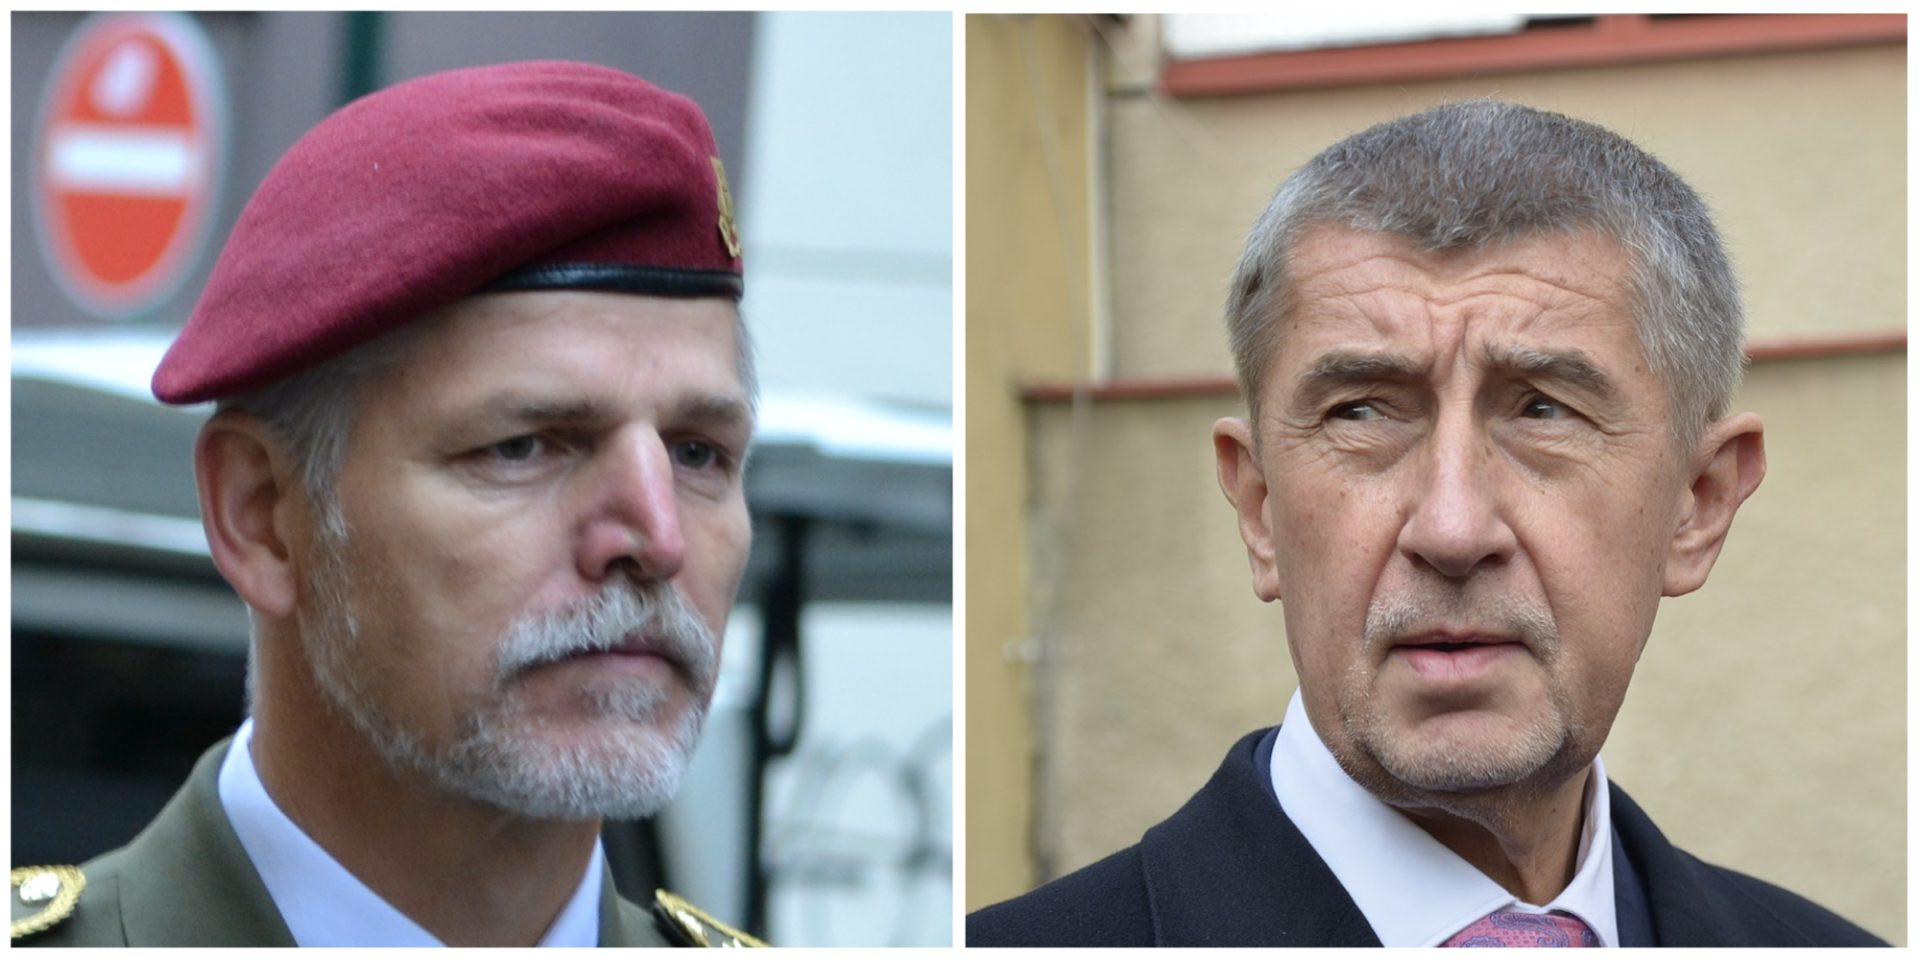 Retired army general Petr Pavel, left, beat populist Andrej Babis in the Jan. 28 Czech Republic election. Photographs courtesy of Wikimedia Commons